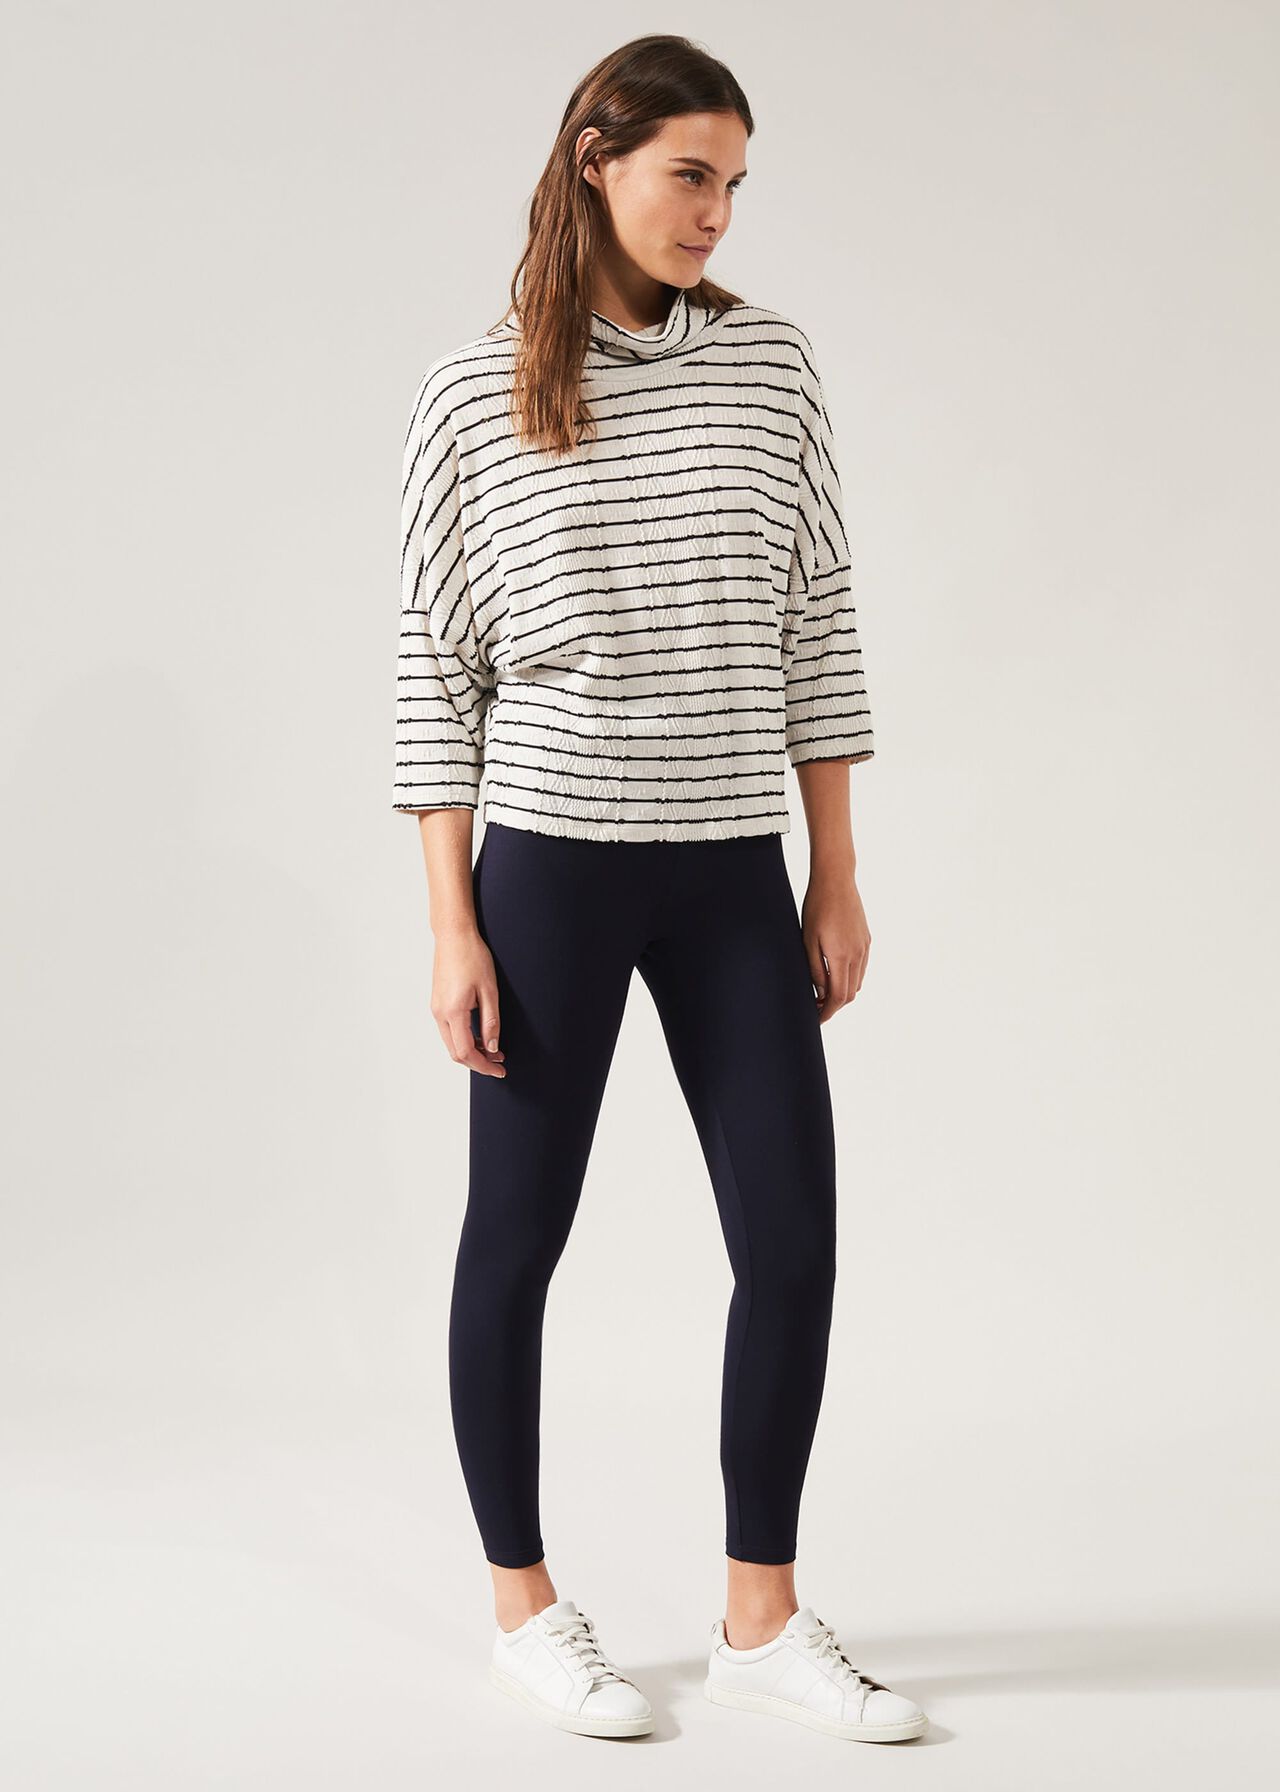 Lizzie Leggings | Phase Eight